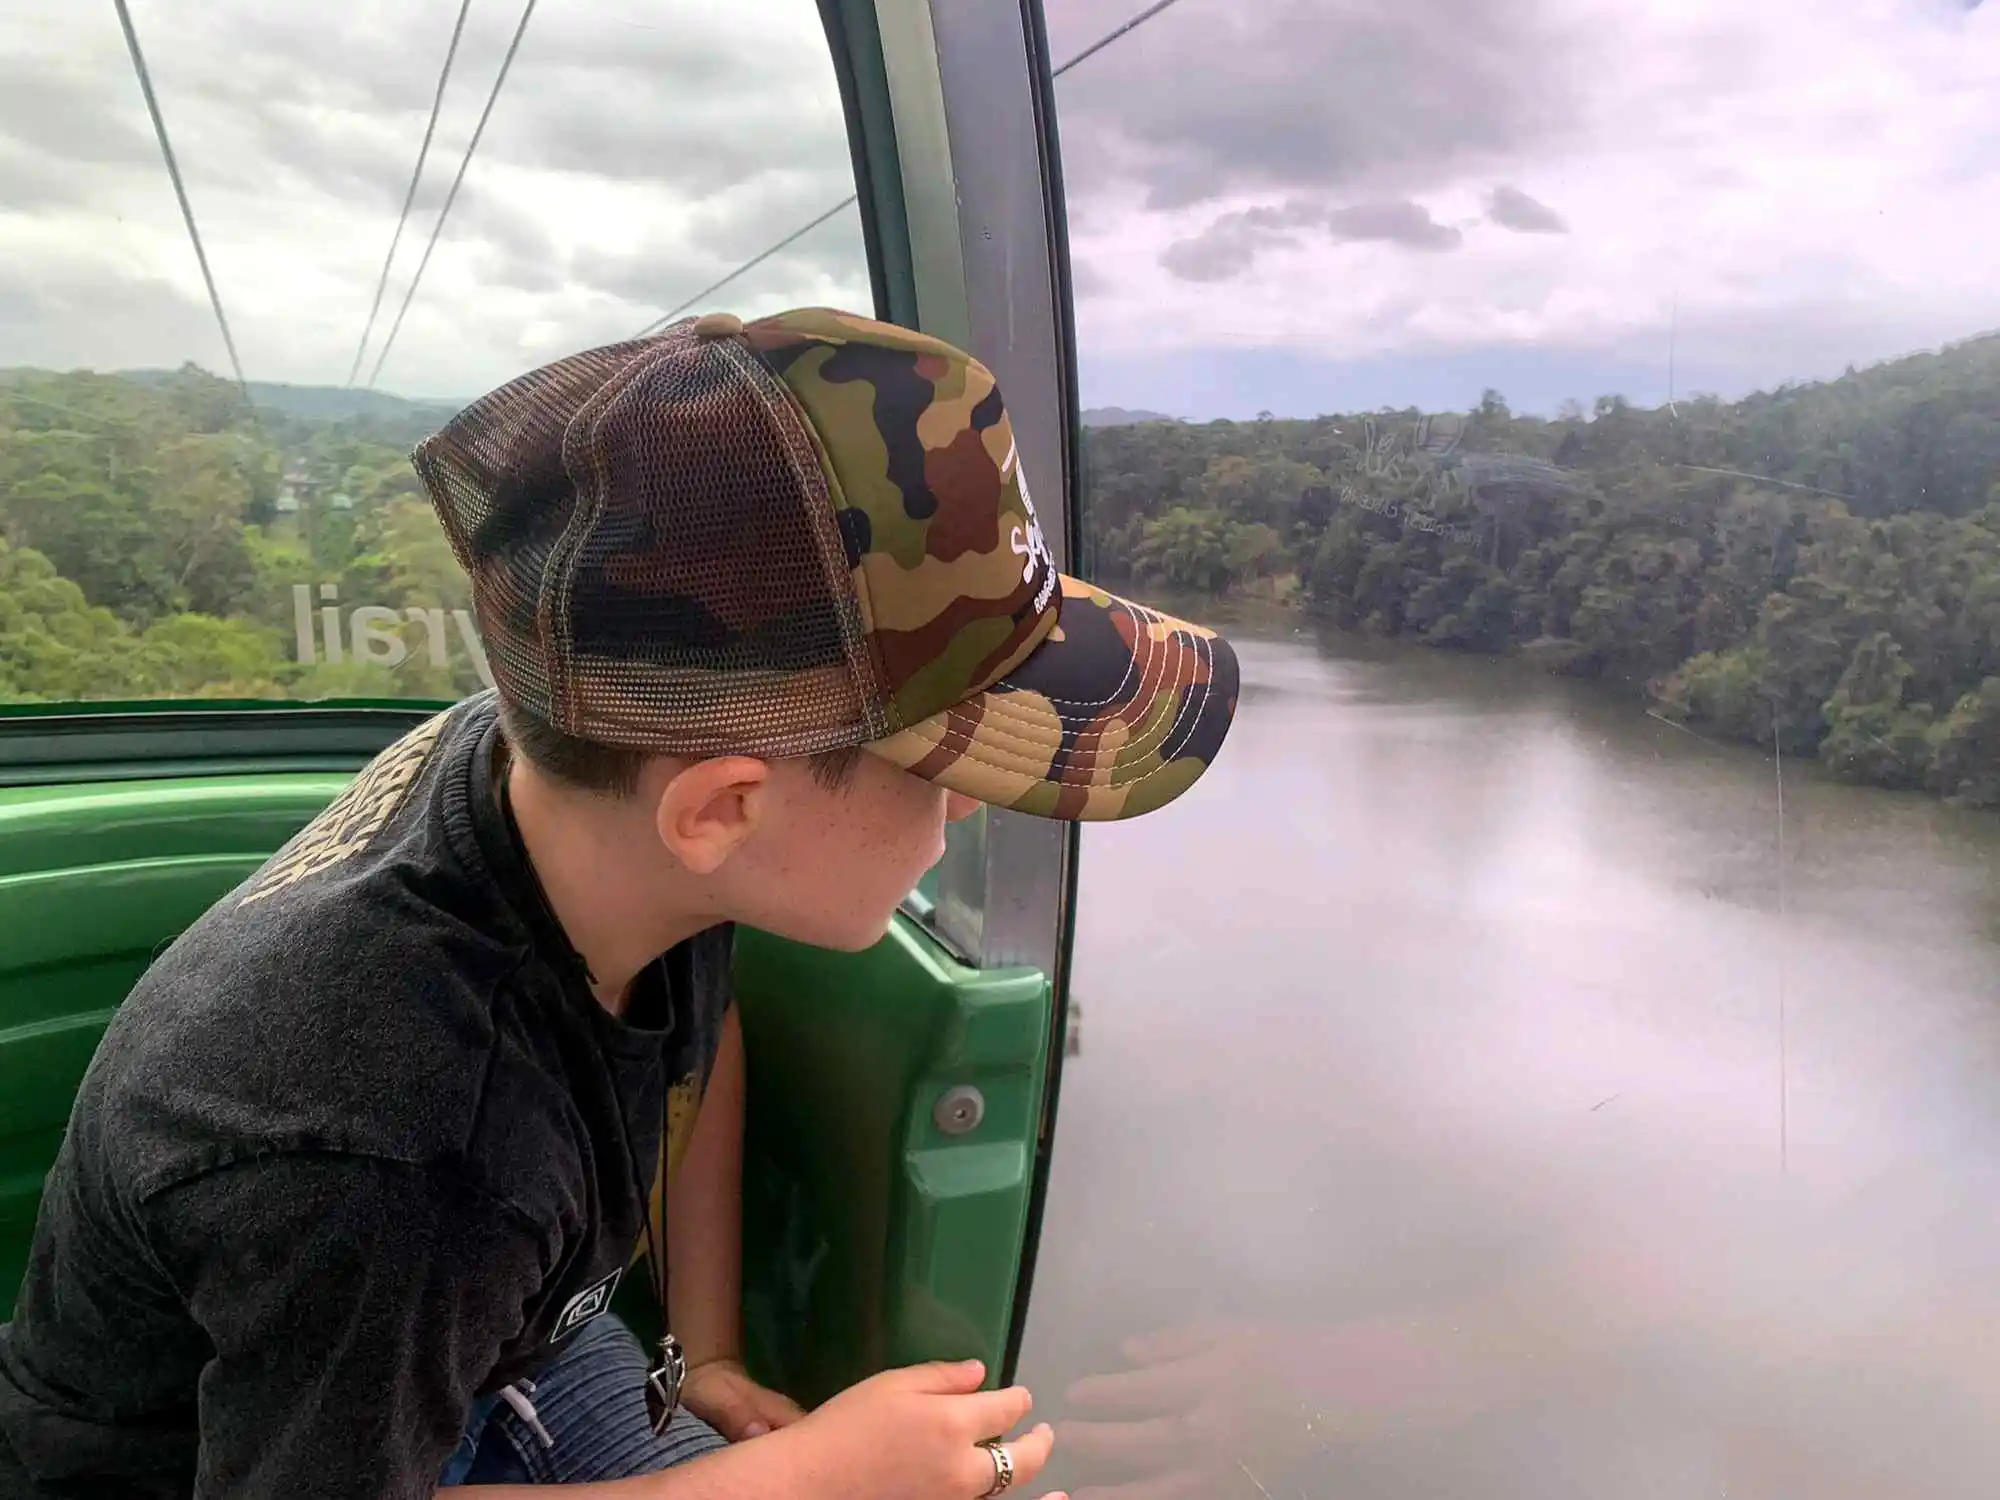 A side view of a boy wearing a cap, looking out of a gondola window at the Barron River below.